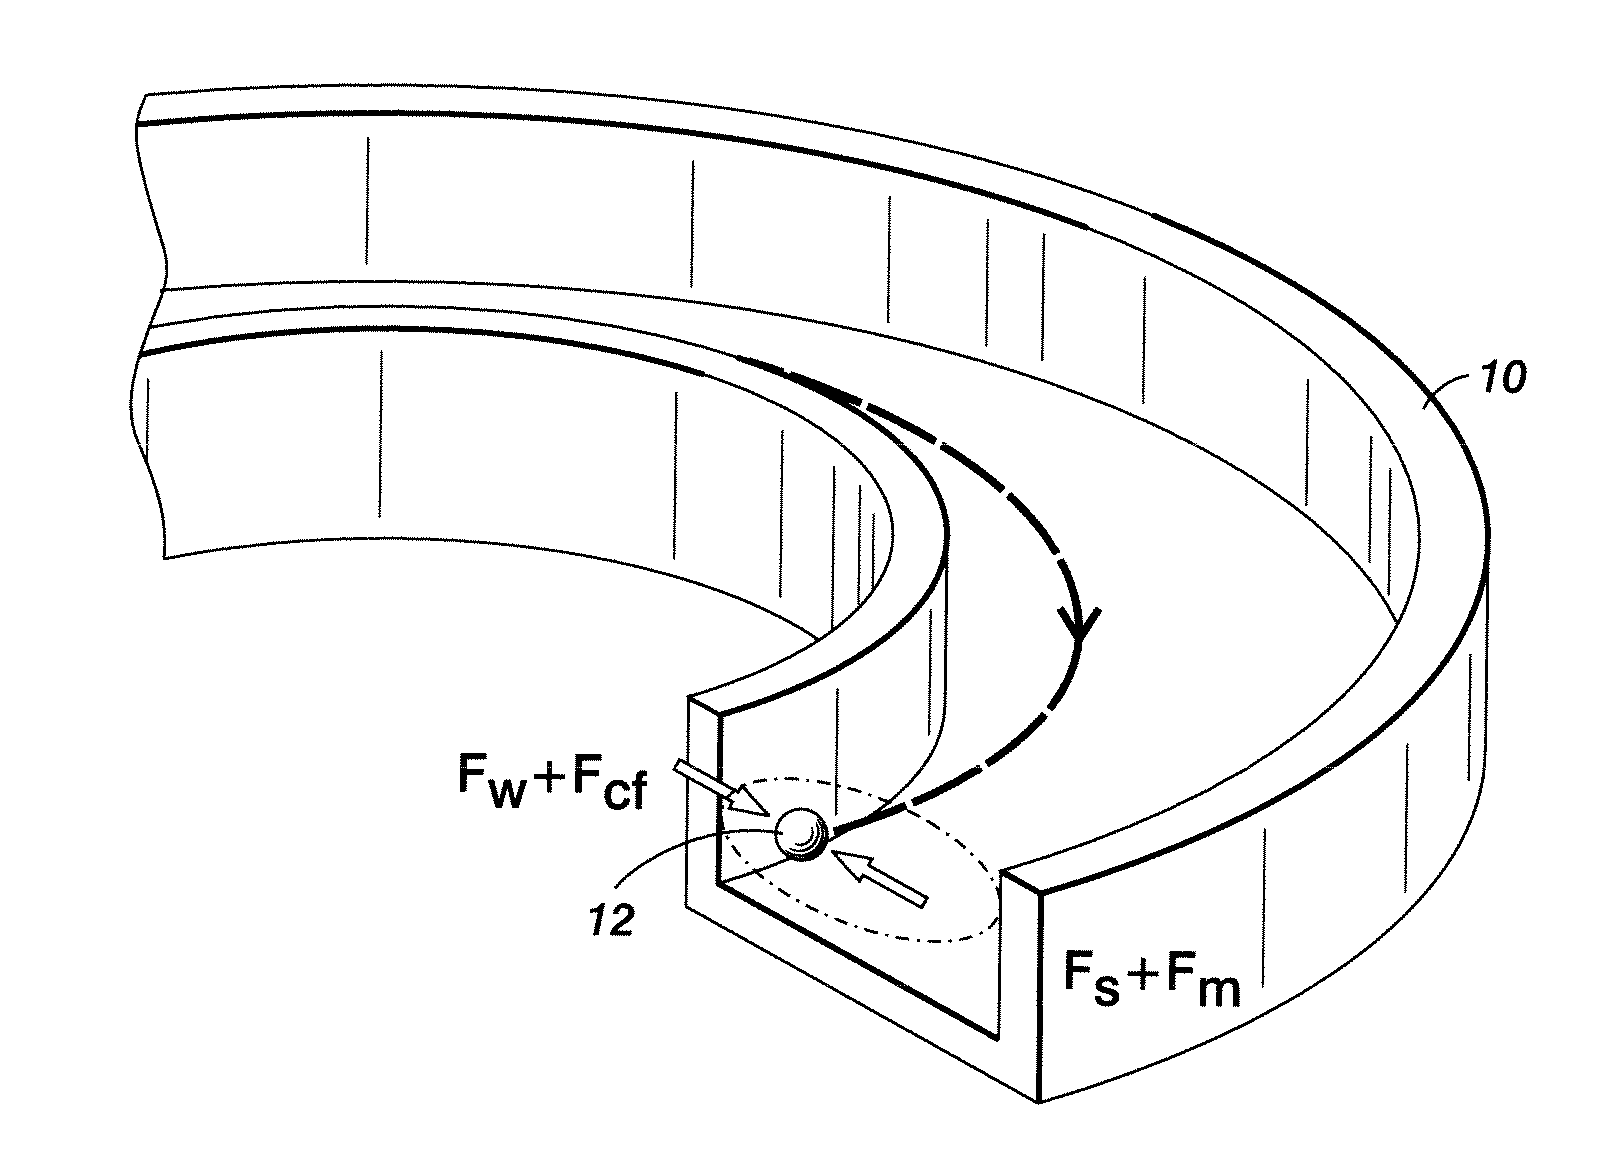 Fluidic Device and Method for Separation of Neutrally Buoyant Particles